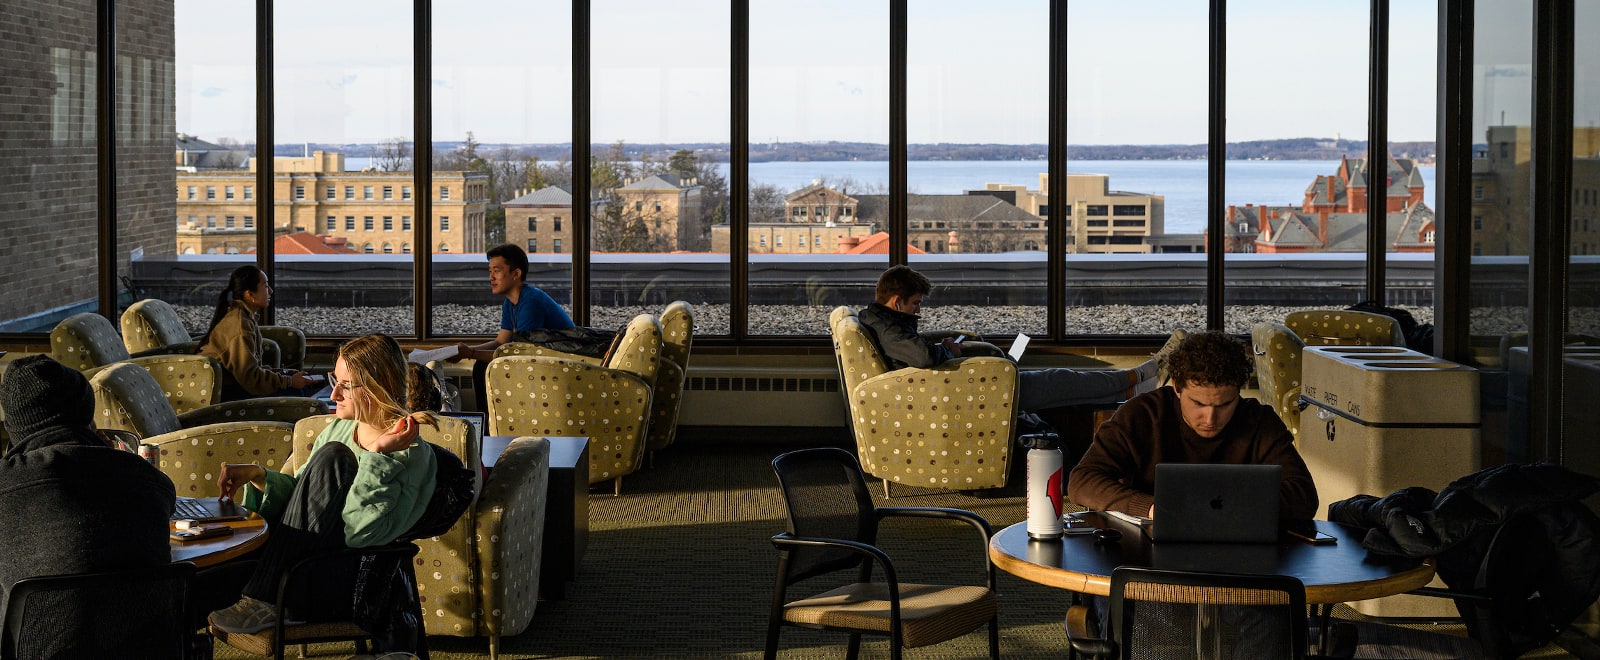 Students study in a lounge on the 13th floor of the Educational Sciences building with views of Lake Mendota in the background.